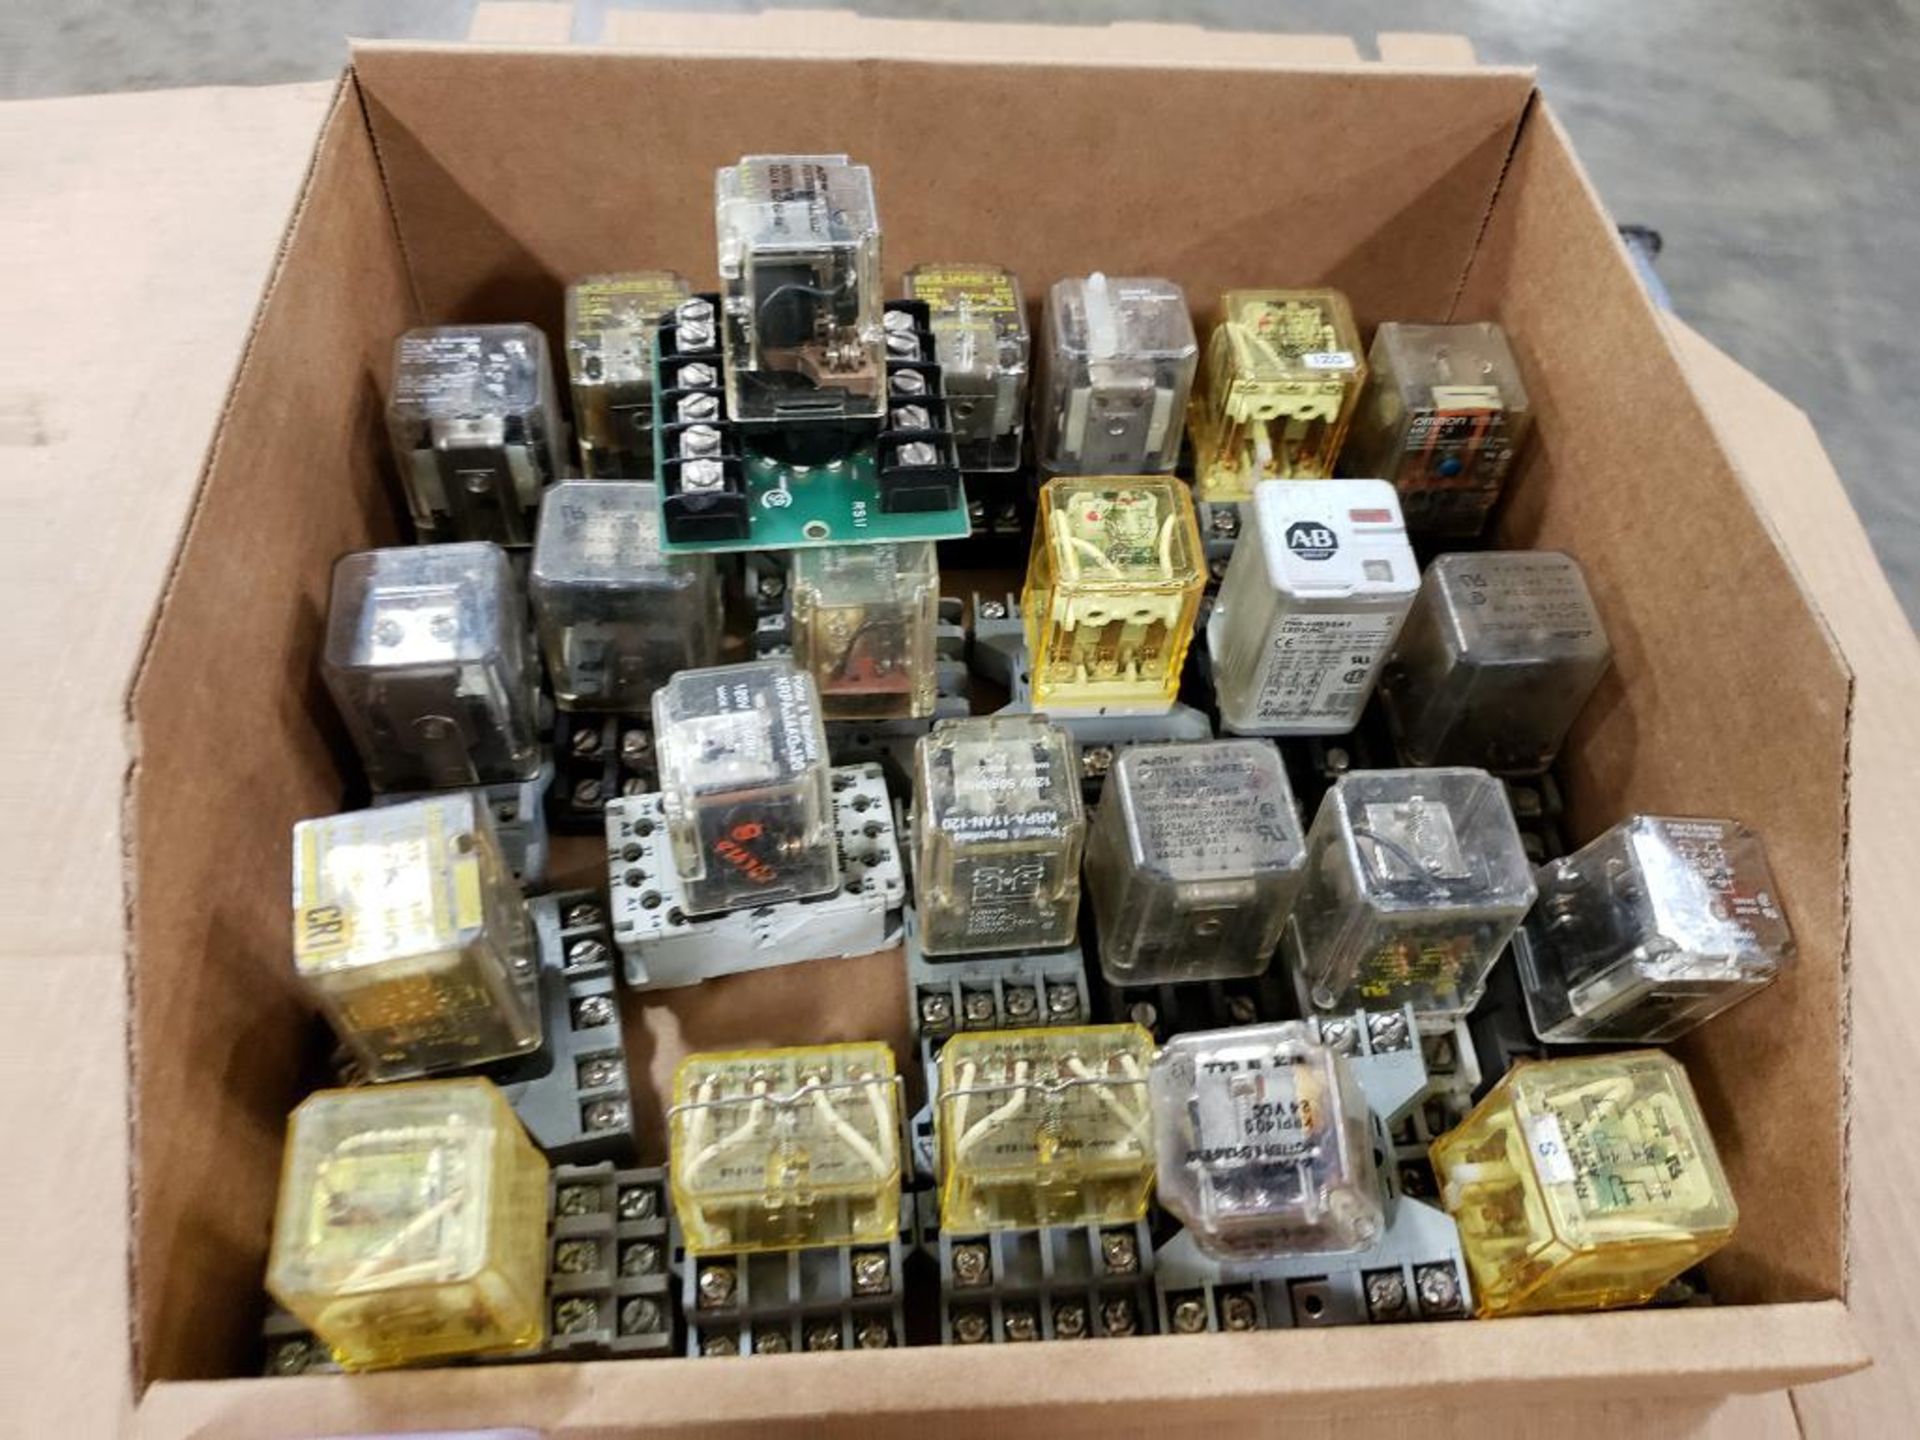 Assorted electrical relays.